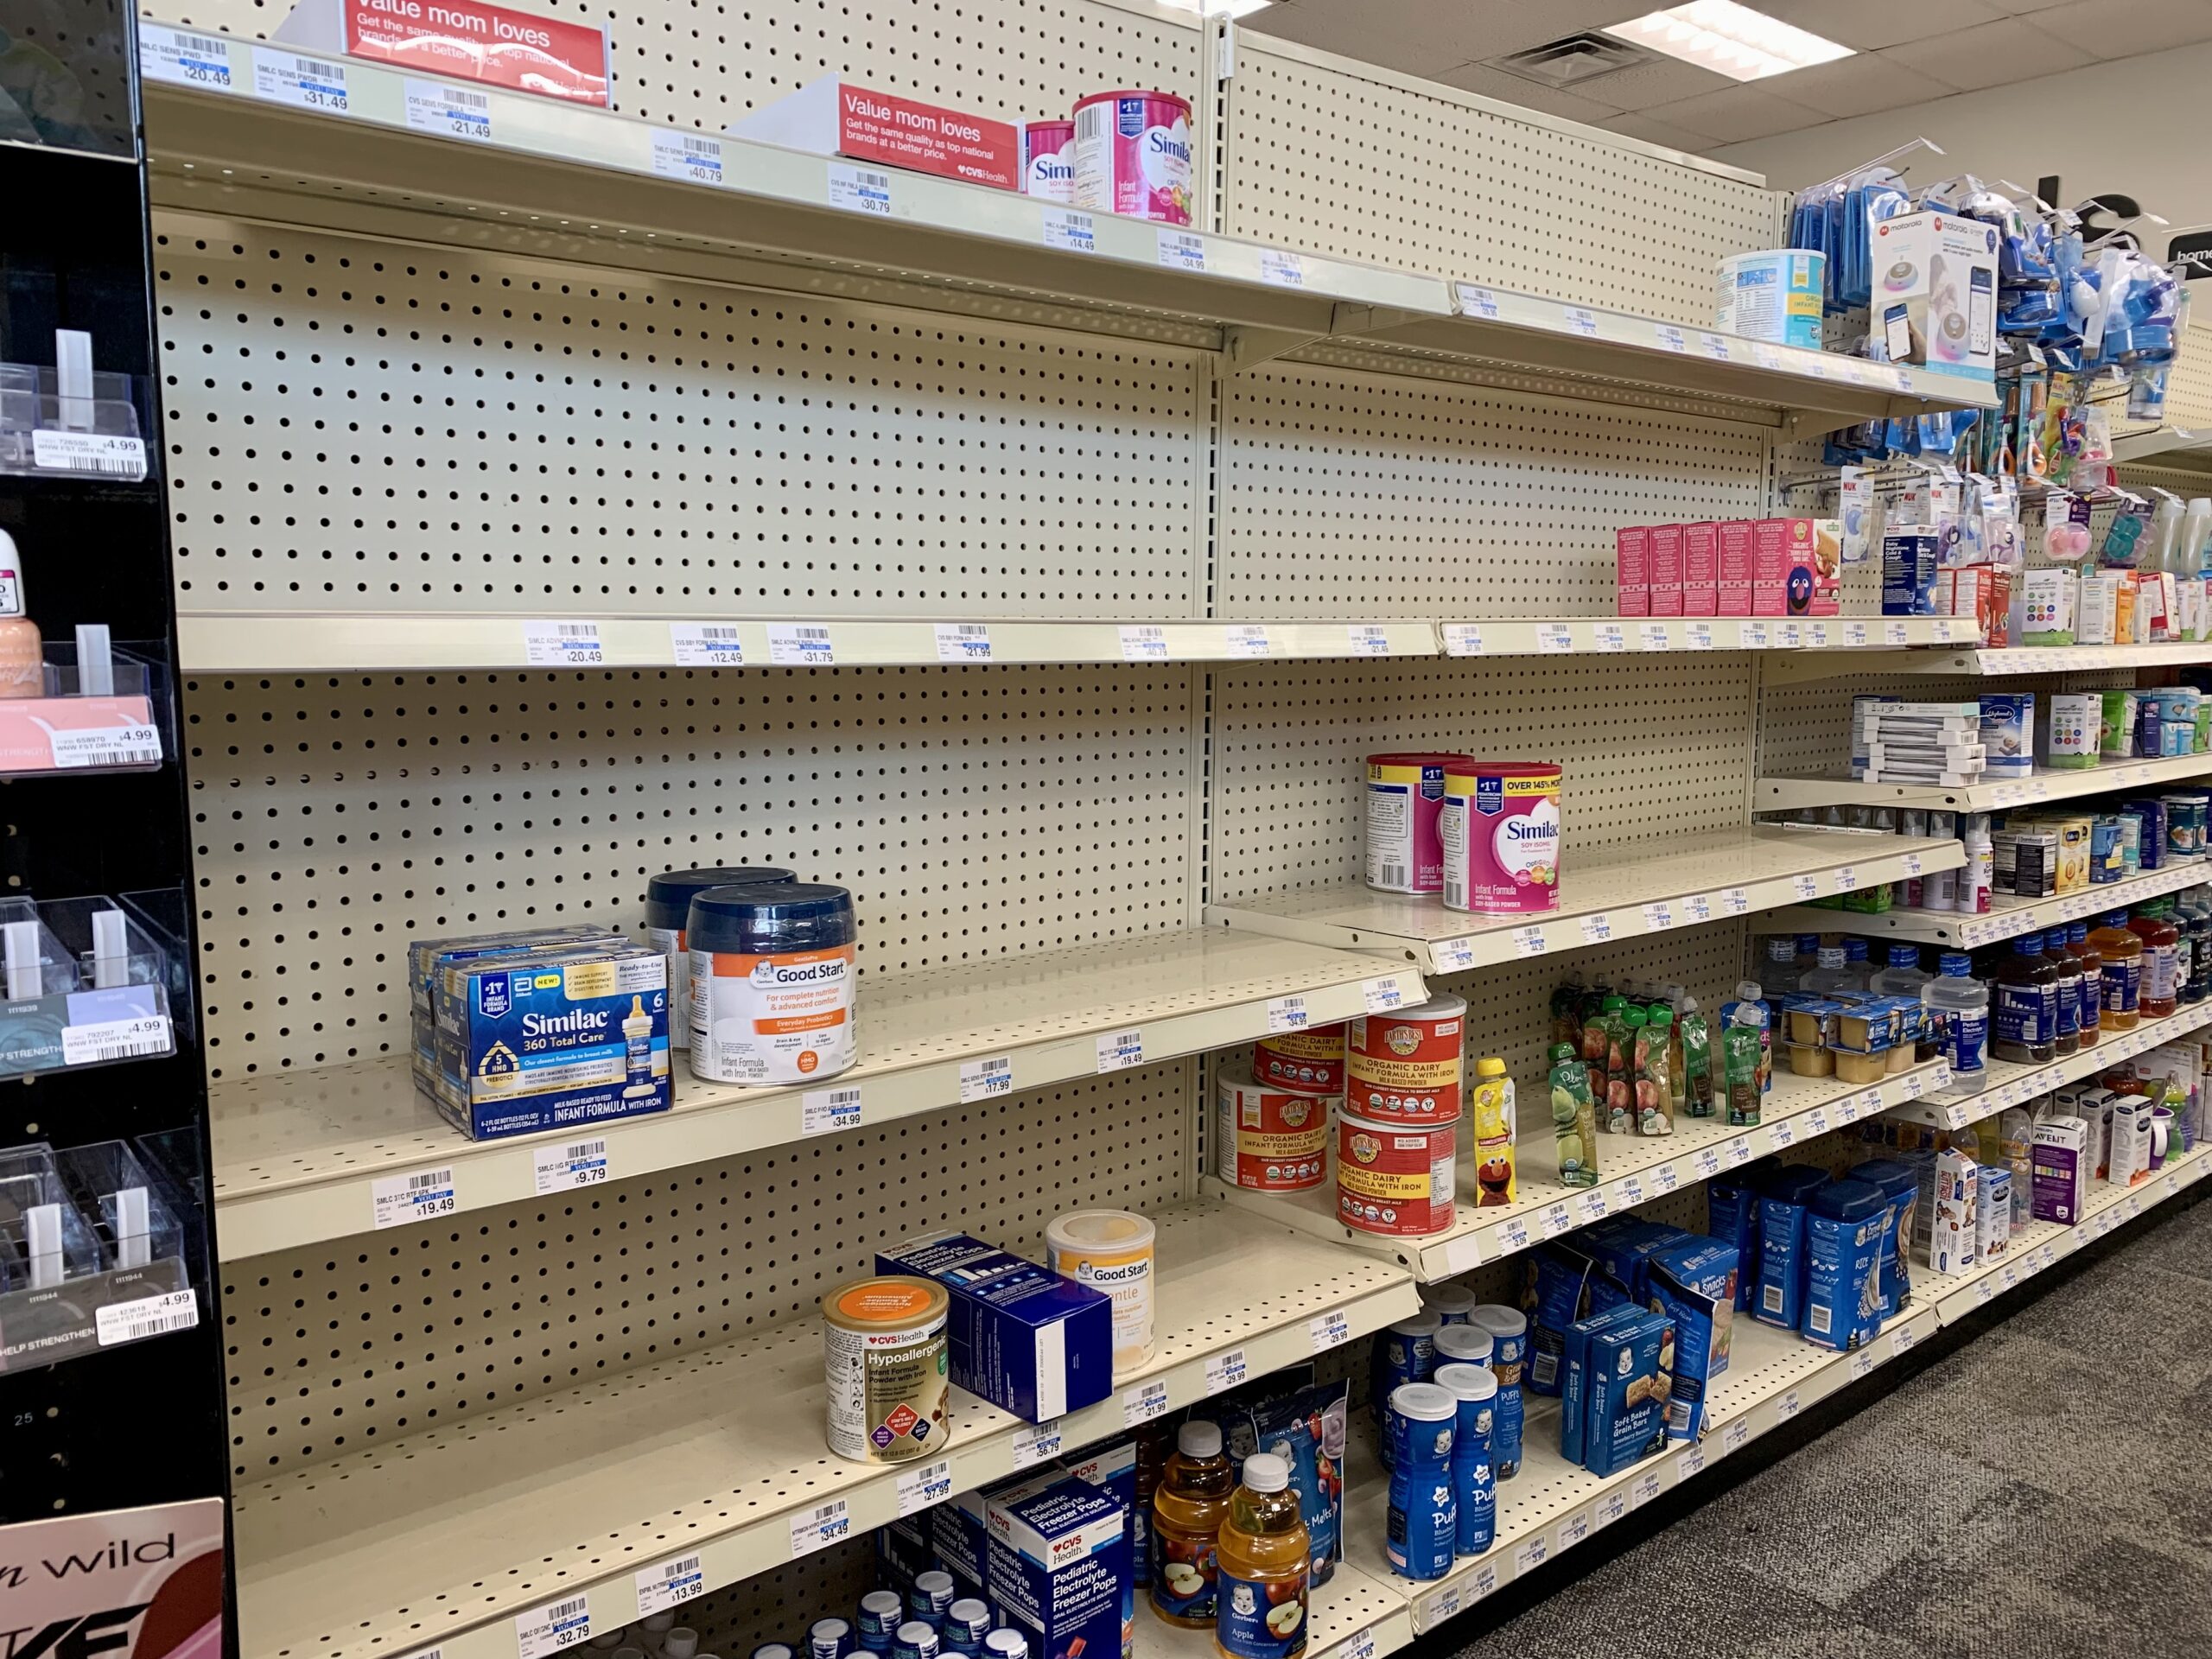 Amid shortages, Georgia groups seek baby formula donations for low-income families – WABE